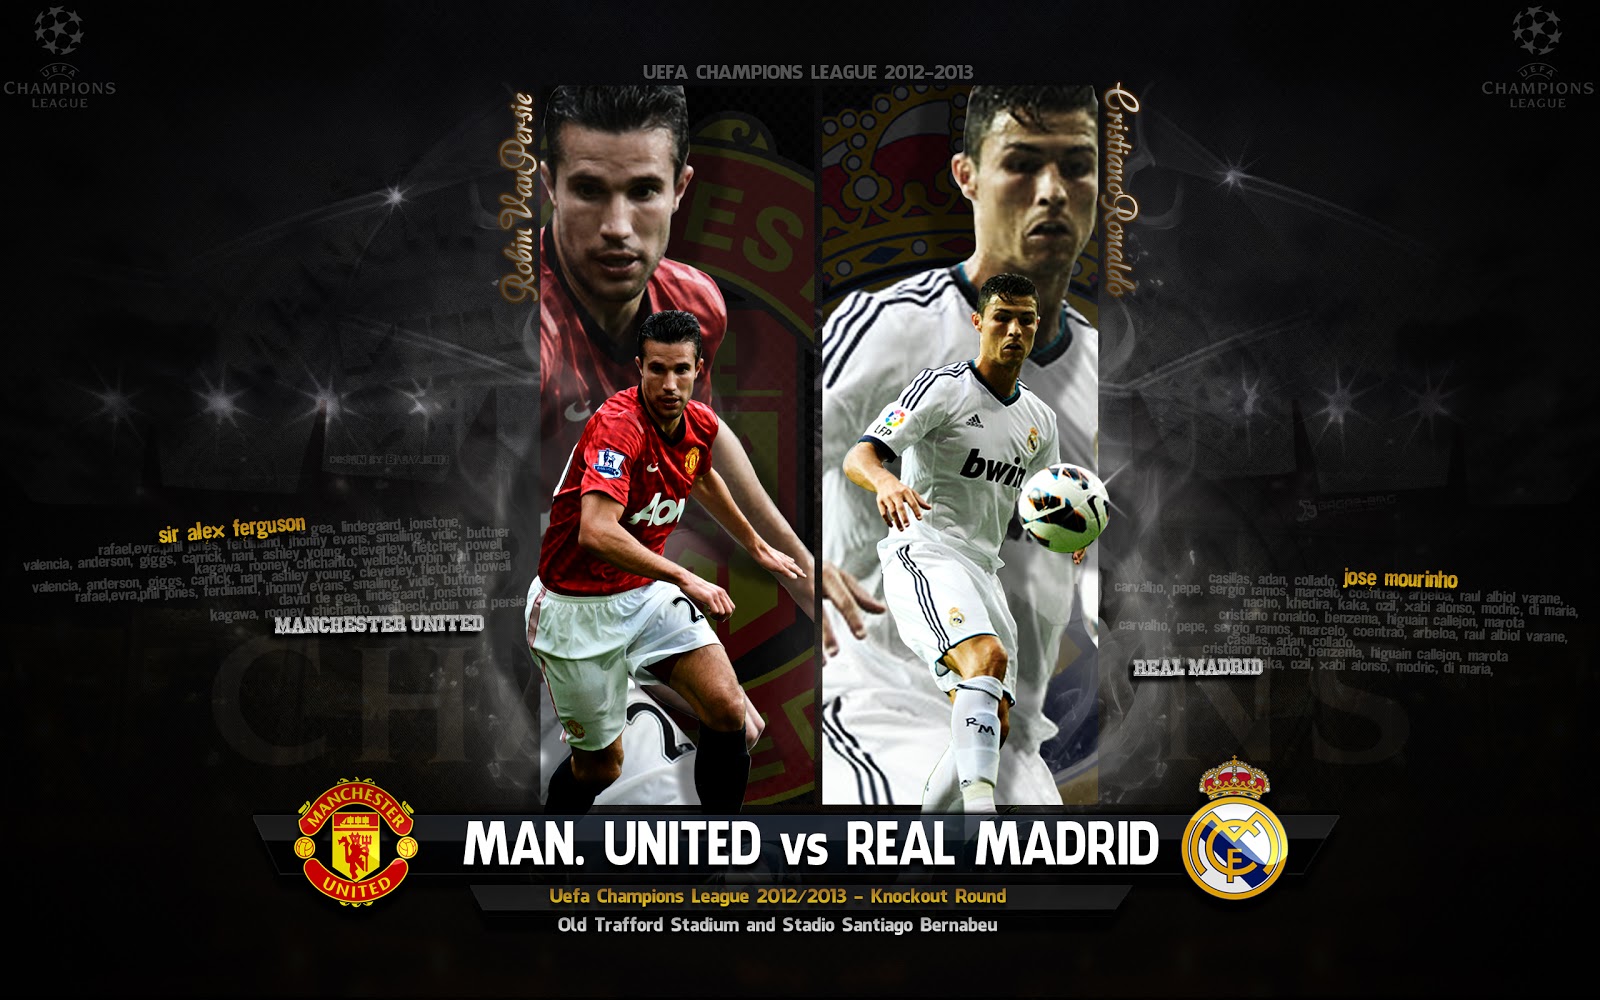 MANCHESTER UNITED VS. REAL MADRID CHAMPIONS LEAGUE QUARTERFINAL 